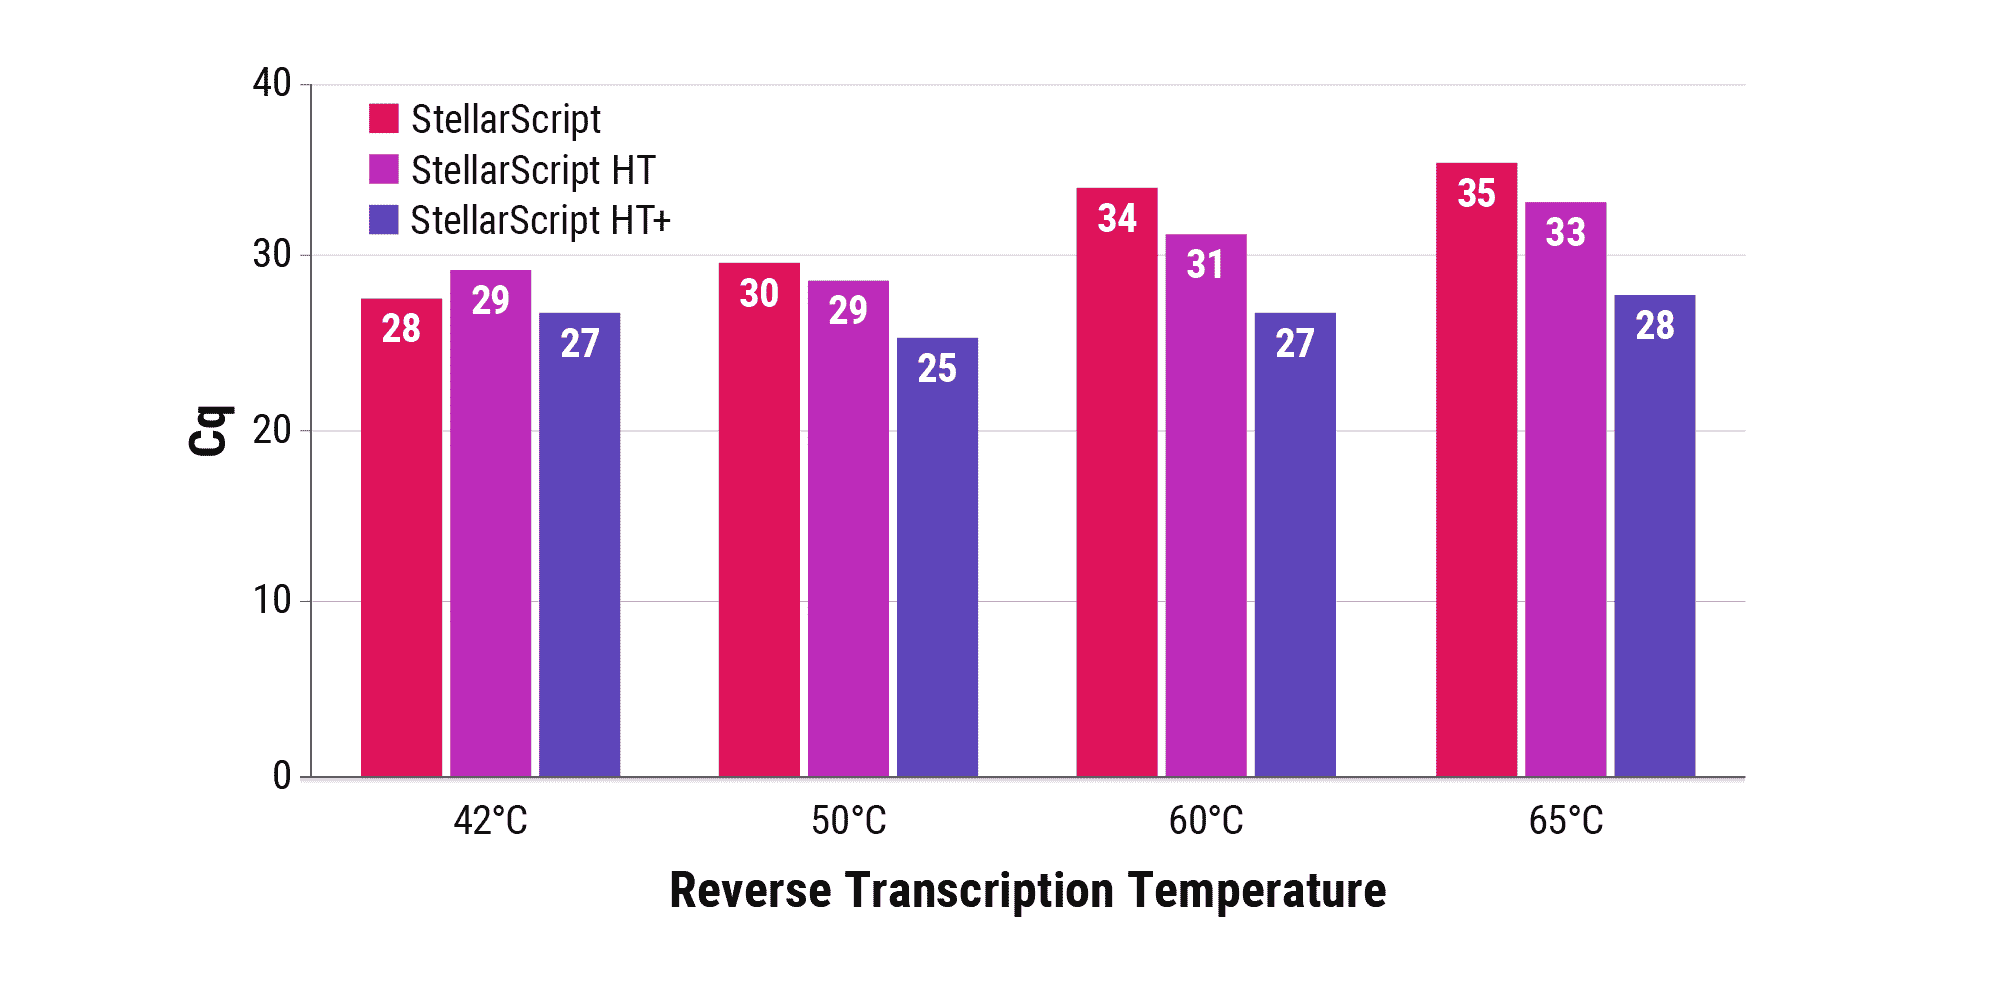 Figure 1B. Overcome RNA template secondary structure with thermostable RTs. StellarScript, StellarScript HT, and StellarScript HT+ were run in oligo-dT-primed first strand synthesis at 42°C, 50°C, 60°C, or 65°C for 30 minutes using 10 ng total liver RNA as template. Resulting cDNA mass was assessed via qPCR. StellarScript and StellarScript HT activities drop at temperatures above 50°C, whereas StellarScript HT+ does not.